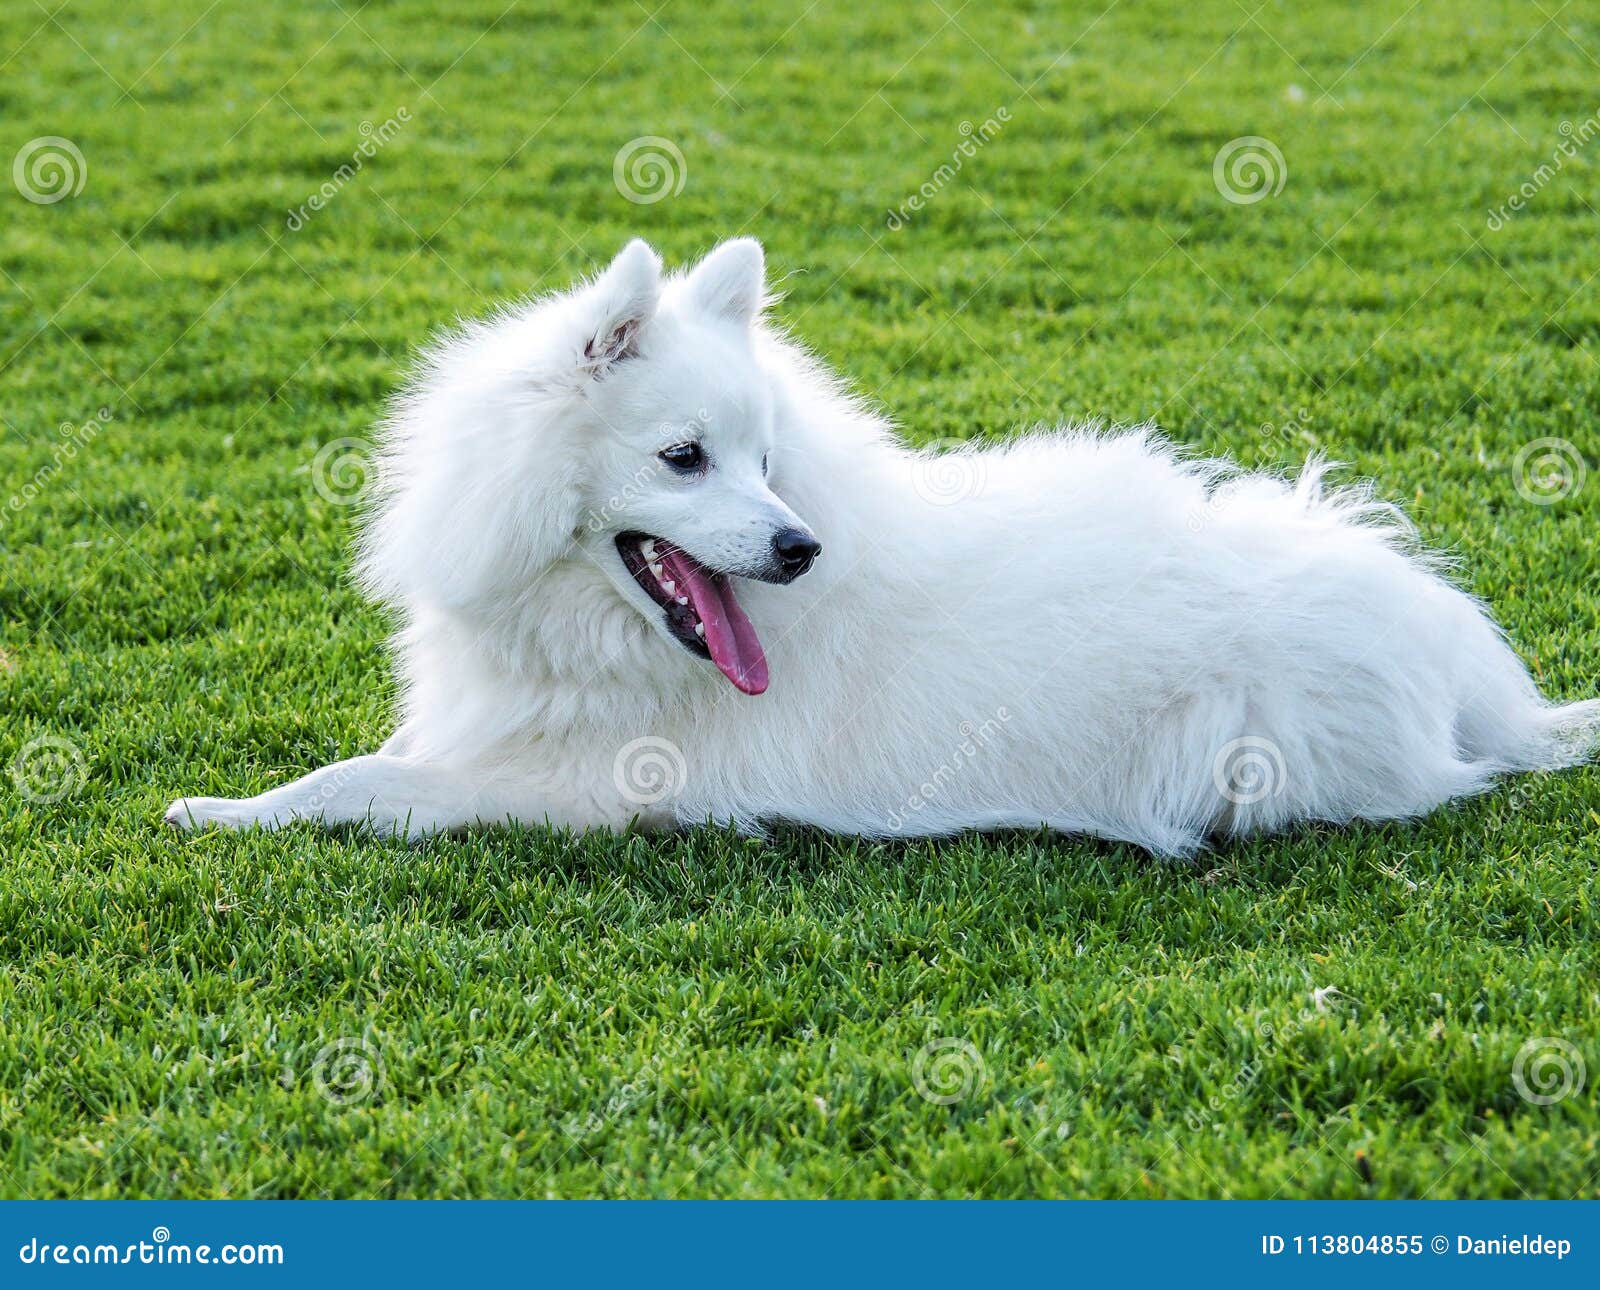 1 138 Japanese Spitz Dog Photos Free Royalty Free Stock Photos From Dreamstime